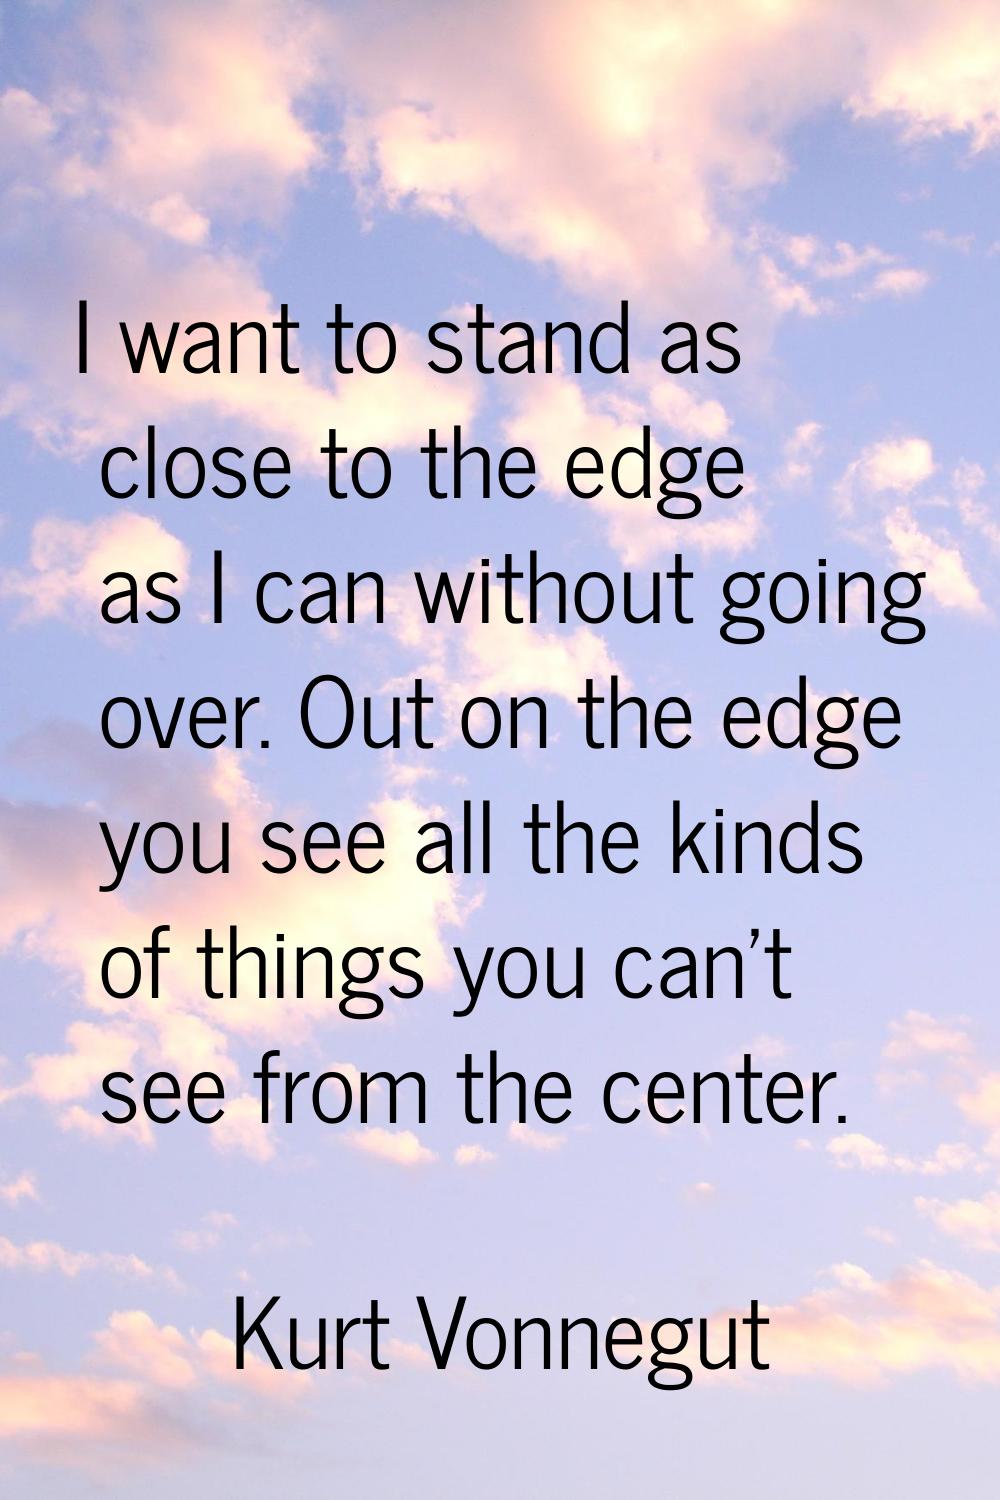 I want to stand as close to the edge as I can without going over. Out on the edge you see all the k